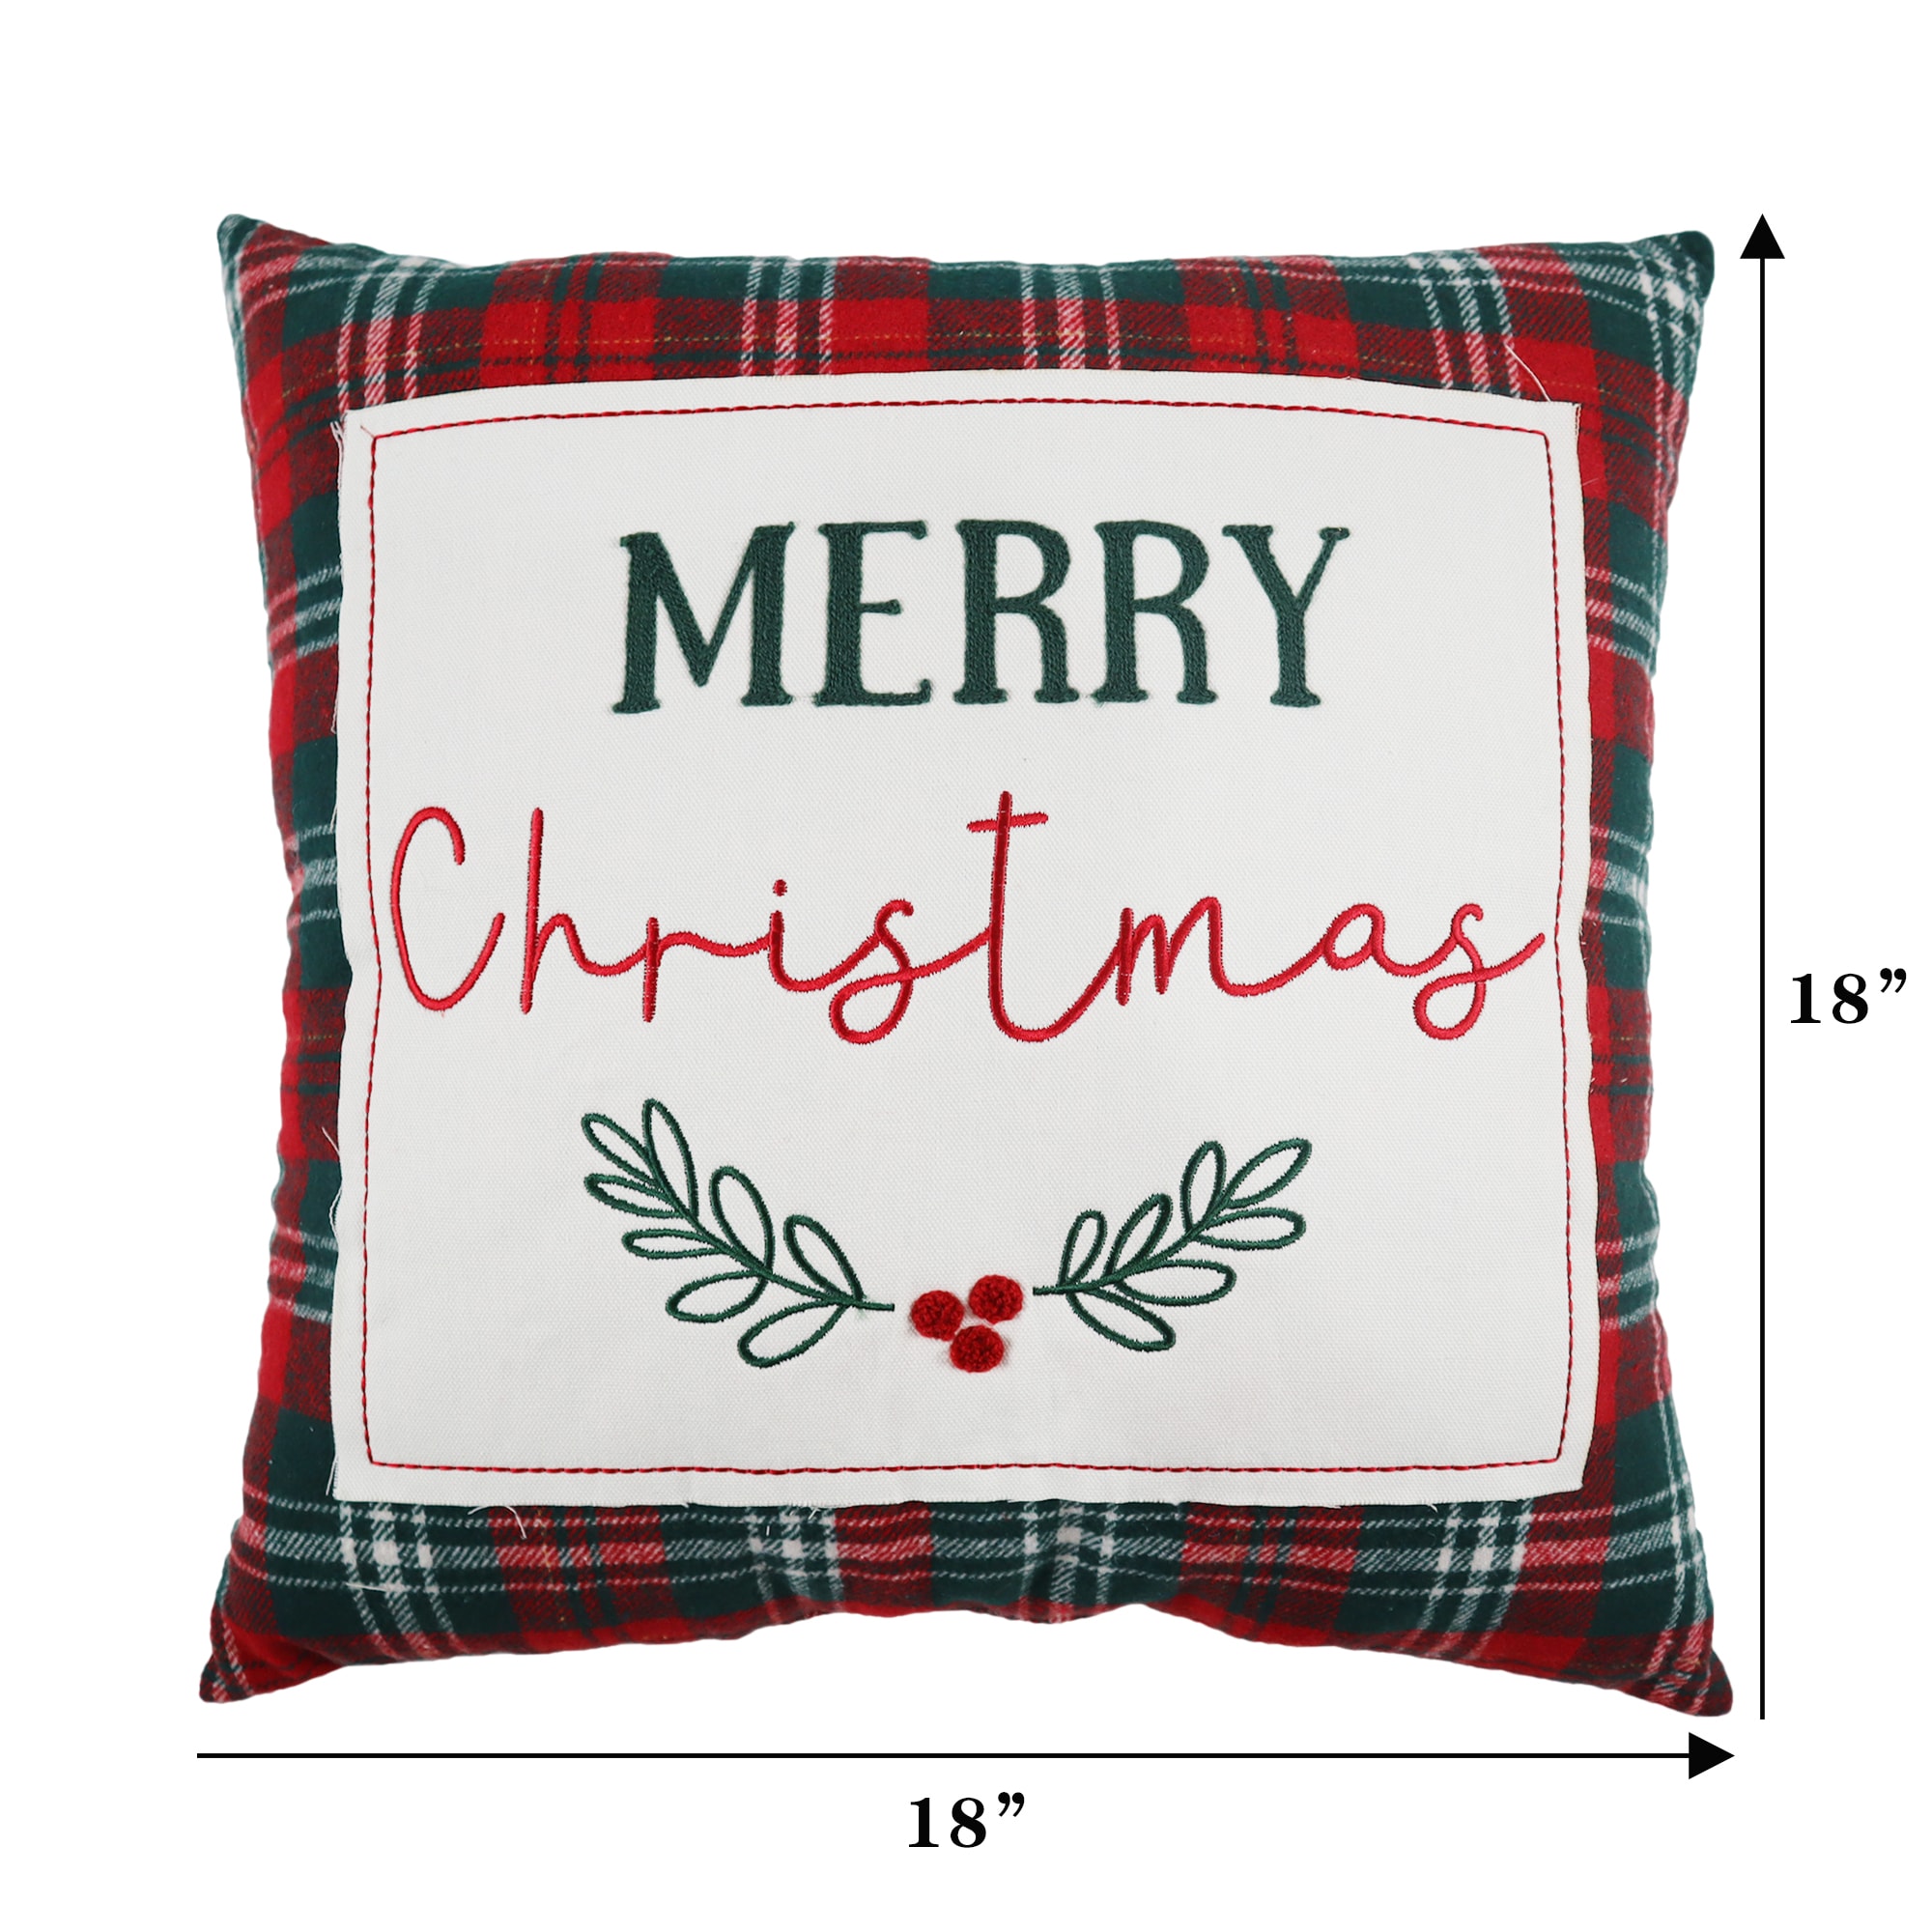 Christmas Tree, Christmas Throw Pillows, Pillow Case Only NO Inserts/Fall  decor, Pool Decor, Couch Pillows